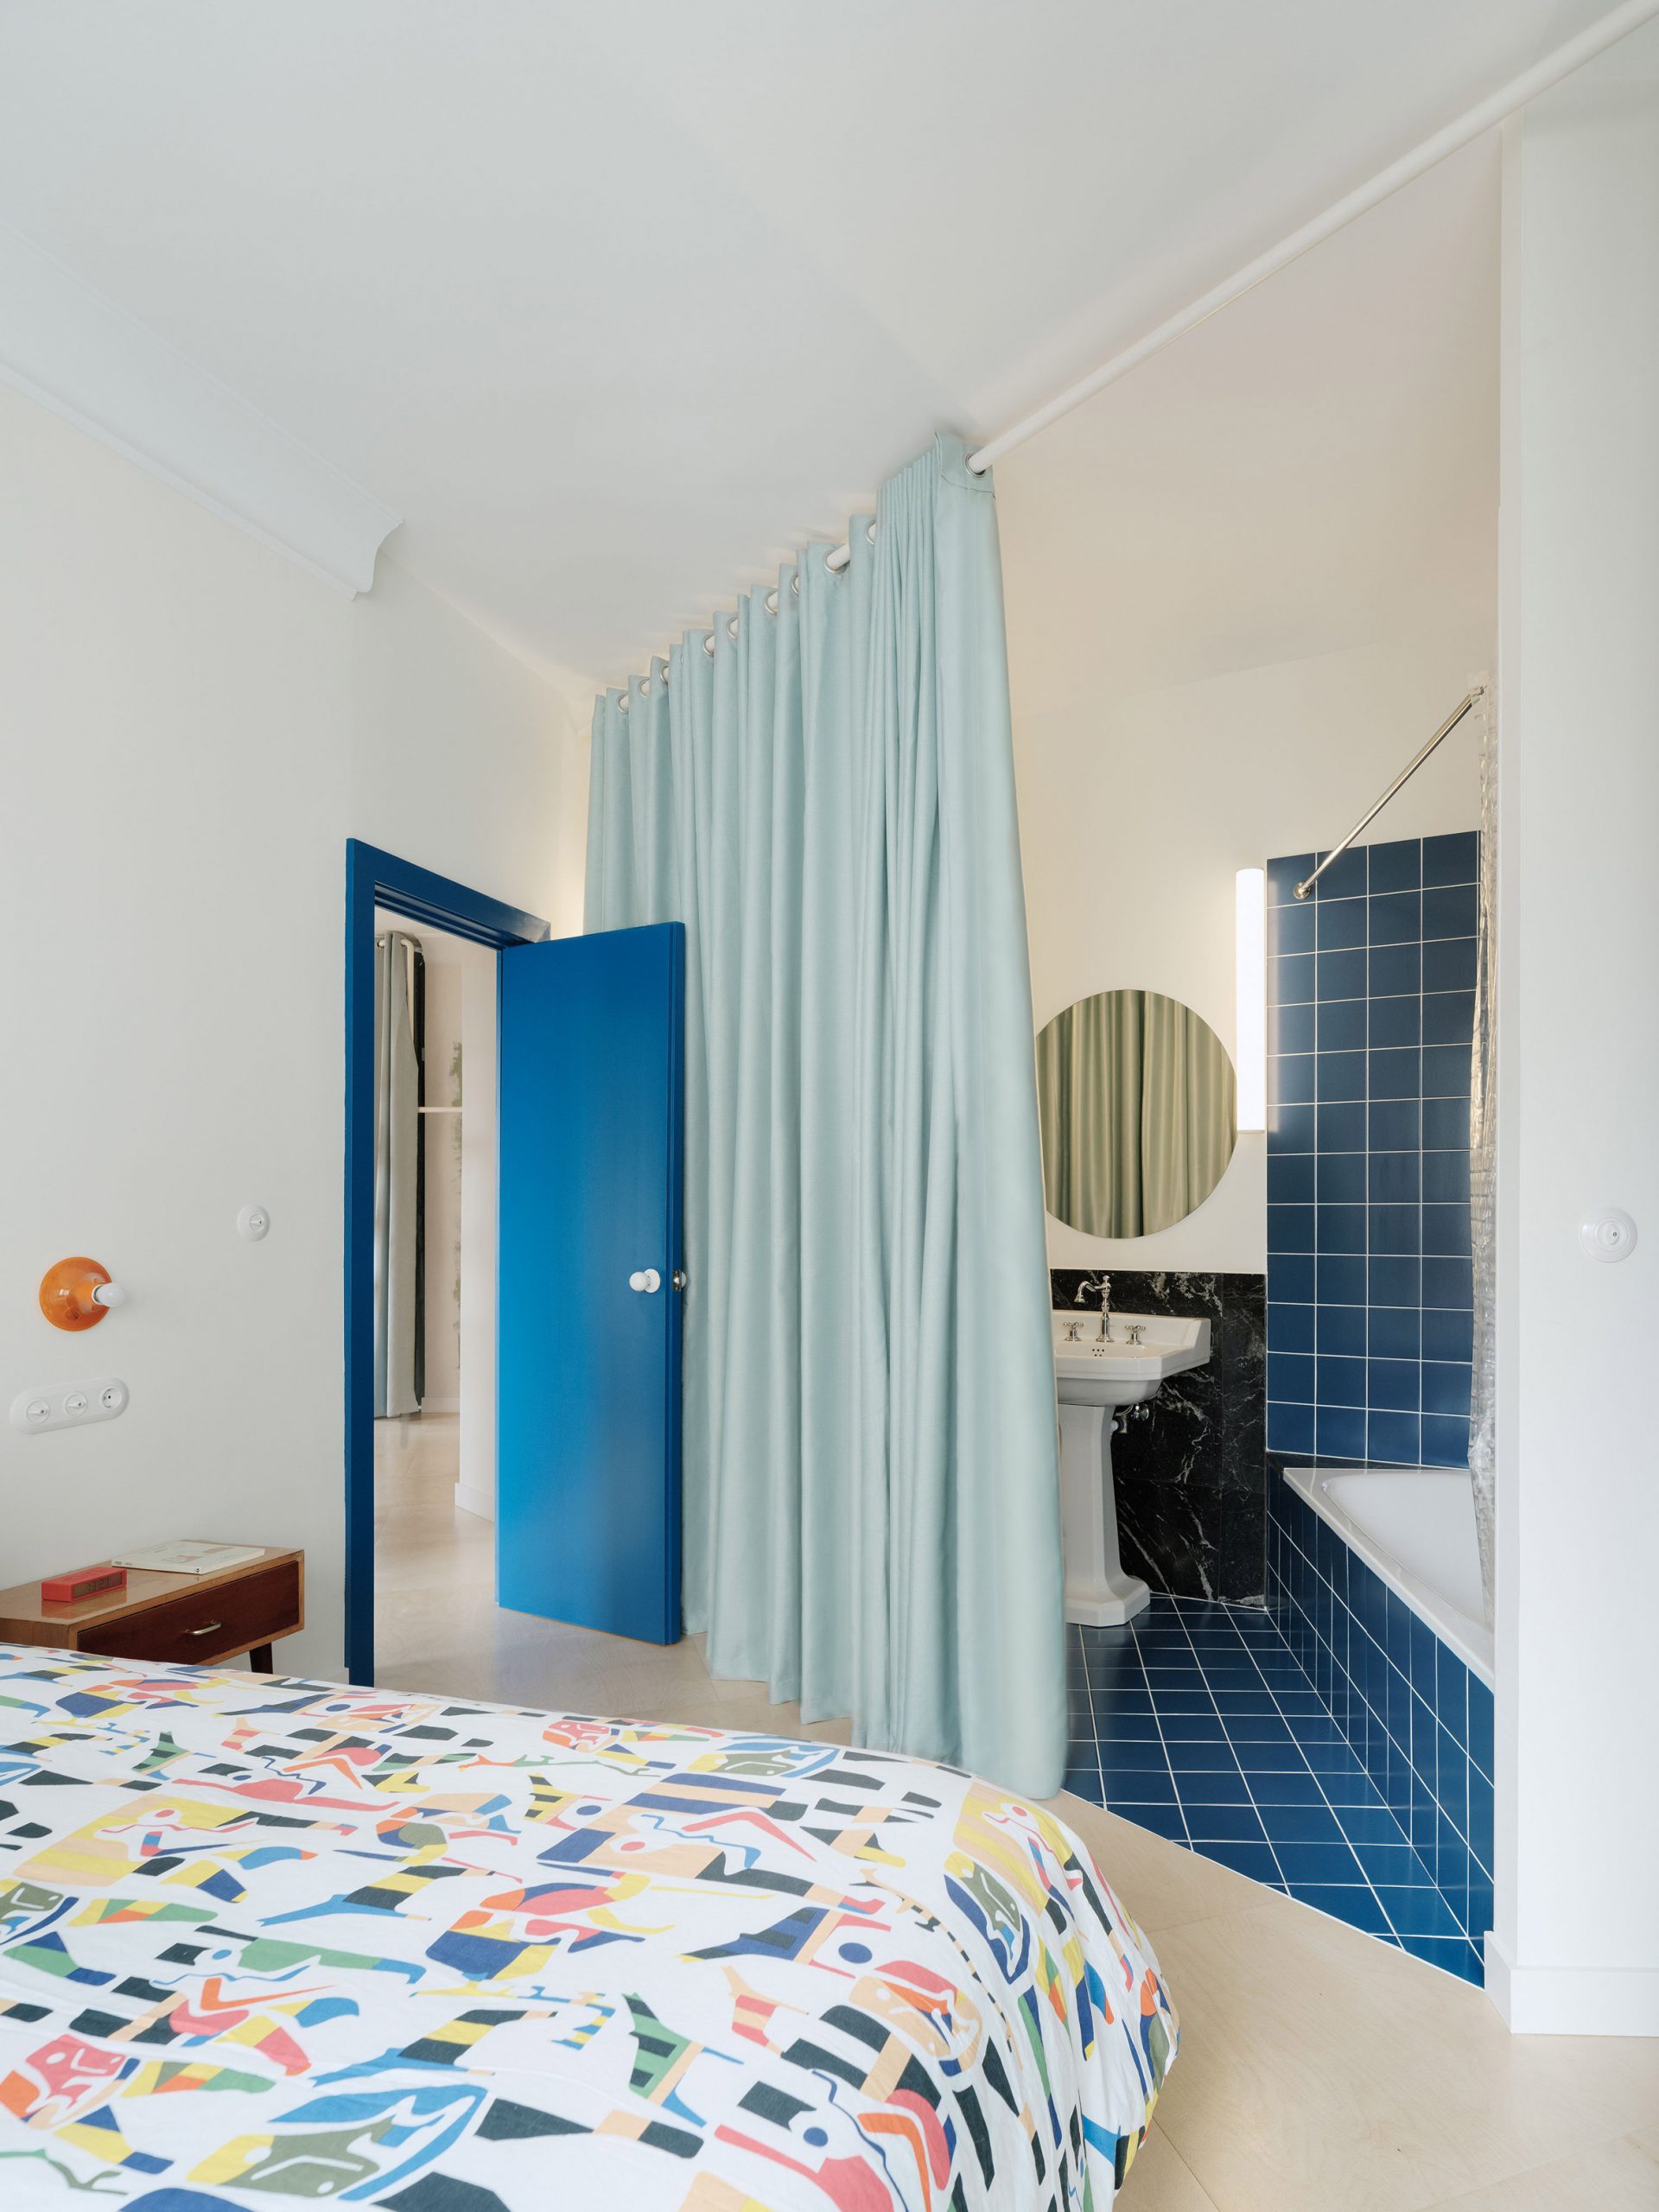 A bathroom with shower and bathtub clad in blue tile